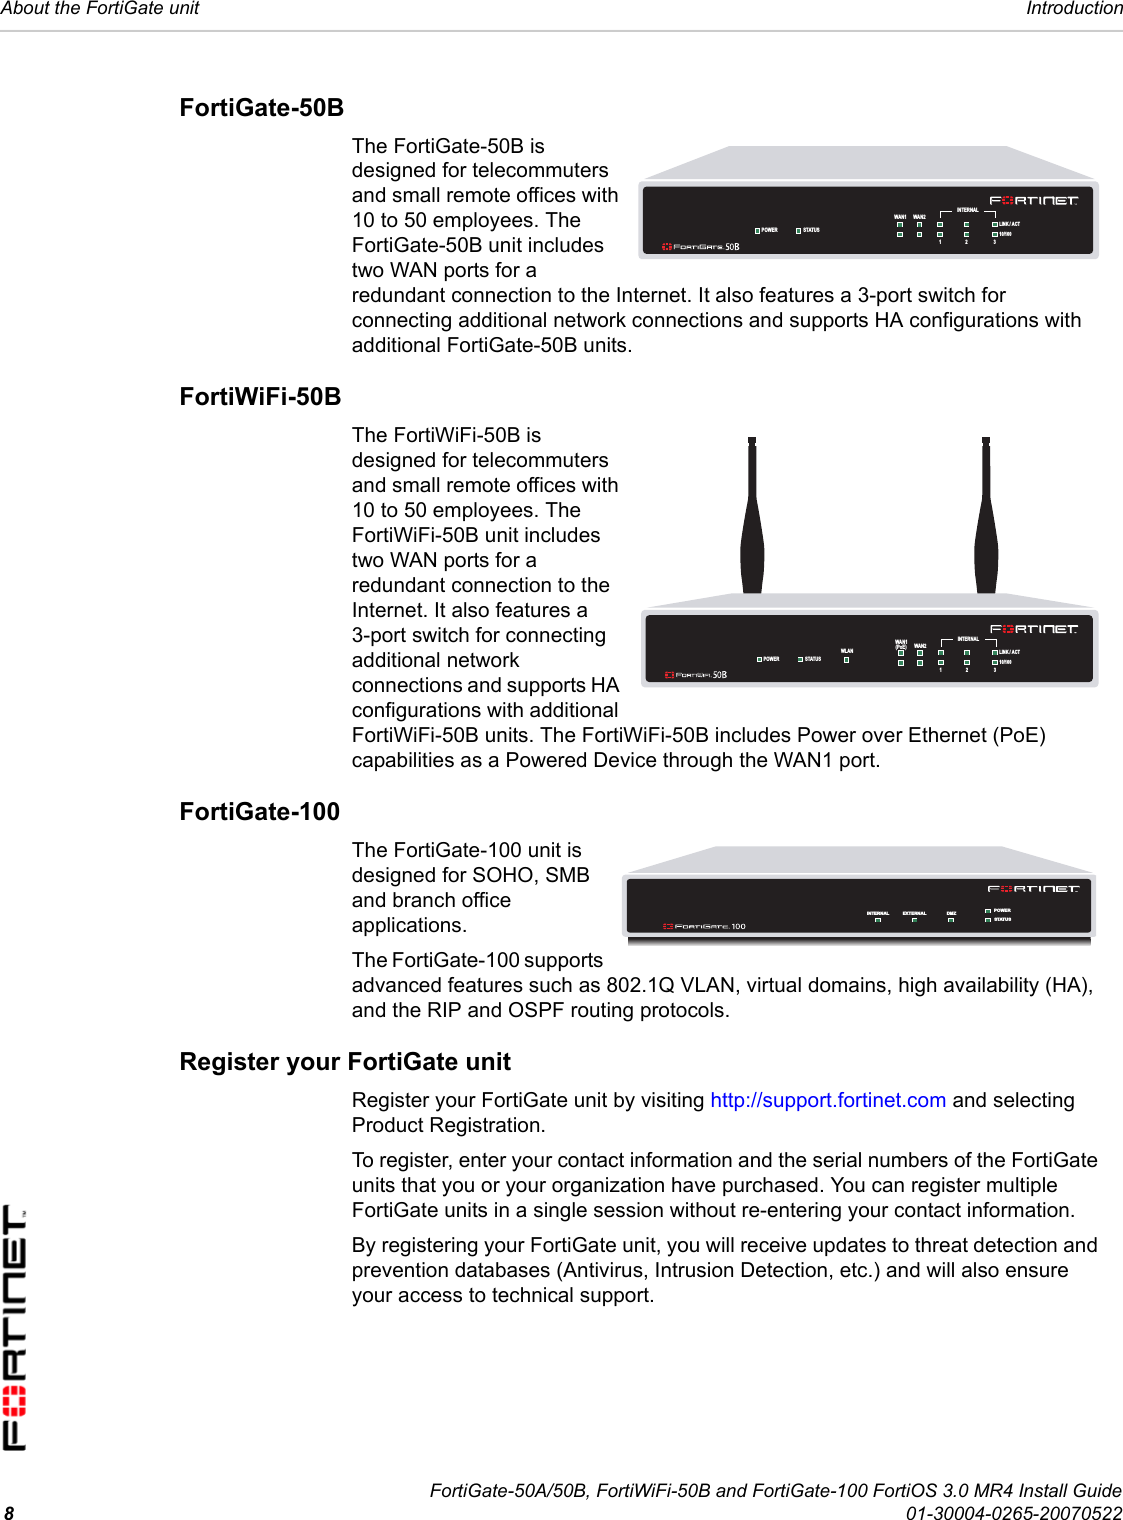 FortiGate-50A/50B, FortiWiFi-50B and FortiGate-100 FortiOS 3.0 MR4 Install Guide801-30004-0265-20070522About the FortiGate unit IntroductionFortiGate-50BThe FortiGate-50B is designed for telecommuters and small remote offices with 10 to 50 employees. The FortiGate-50B unit includes two WAN ports for a redundant connection to the Internet. It also features a 3-port switch for connecting additional network connections and supports HA configurations with additional FortiGate-50B units.FortiWiFi-50BThe FortiWiFi-50B is designed for telecommuters and small remote offices with 10 to 50 employees. The FortiWiFi-50B unit includes two WAN ports for a redundant connection to the Internet. It also features a 3-port switch for connecting additional network connections and supports HA configurations with additional FortiWiFi-50B units. The FortiWiFi-50B includes Power over Ethernet (PoE) capabilities as a Powered Device through the WAN1 port.FortiGate-100The FortiGate-100 unit is designed for SOHO, SMB and branch office applications.The FortiGate-100 supports advanced features such as 802.1Q VLAN, virtual domains, high availability (HA), and the RIP and OSPF routing protocols.Register your FortiGate unitRegister your FortiGate unit by visiting http://support.fortinet.com and selecting Product Registration.To register, enter your contact information and the serial numbers of the FortiGate units that you or your organization have purchased. You can register multiple FortiGate units in a single session without re-entering your contact information.By registering your FortiGate unit, you will receive updates to threat detection and prevention databases (Antivirus, Intrusion Detection, etc.) and will also ensure your access to technical support.WAN1 WA N2POWER STATUSINTERNAL321LINK / ACT10/100WAN1 WA N2POWER STATUSINTERNAL321LINK / ACT10/100WLAN(PoE)INTERNAL EXTERNAL DMZ POWERSTATUS